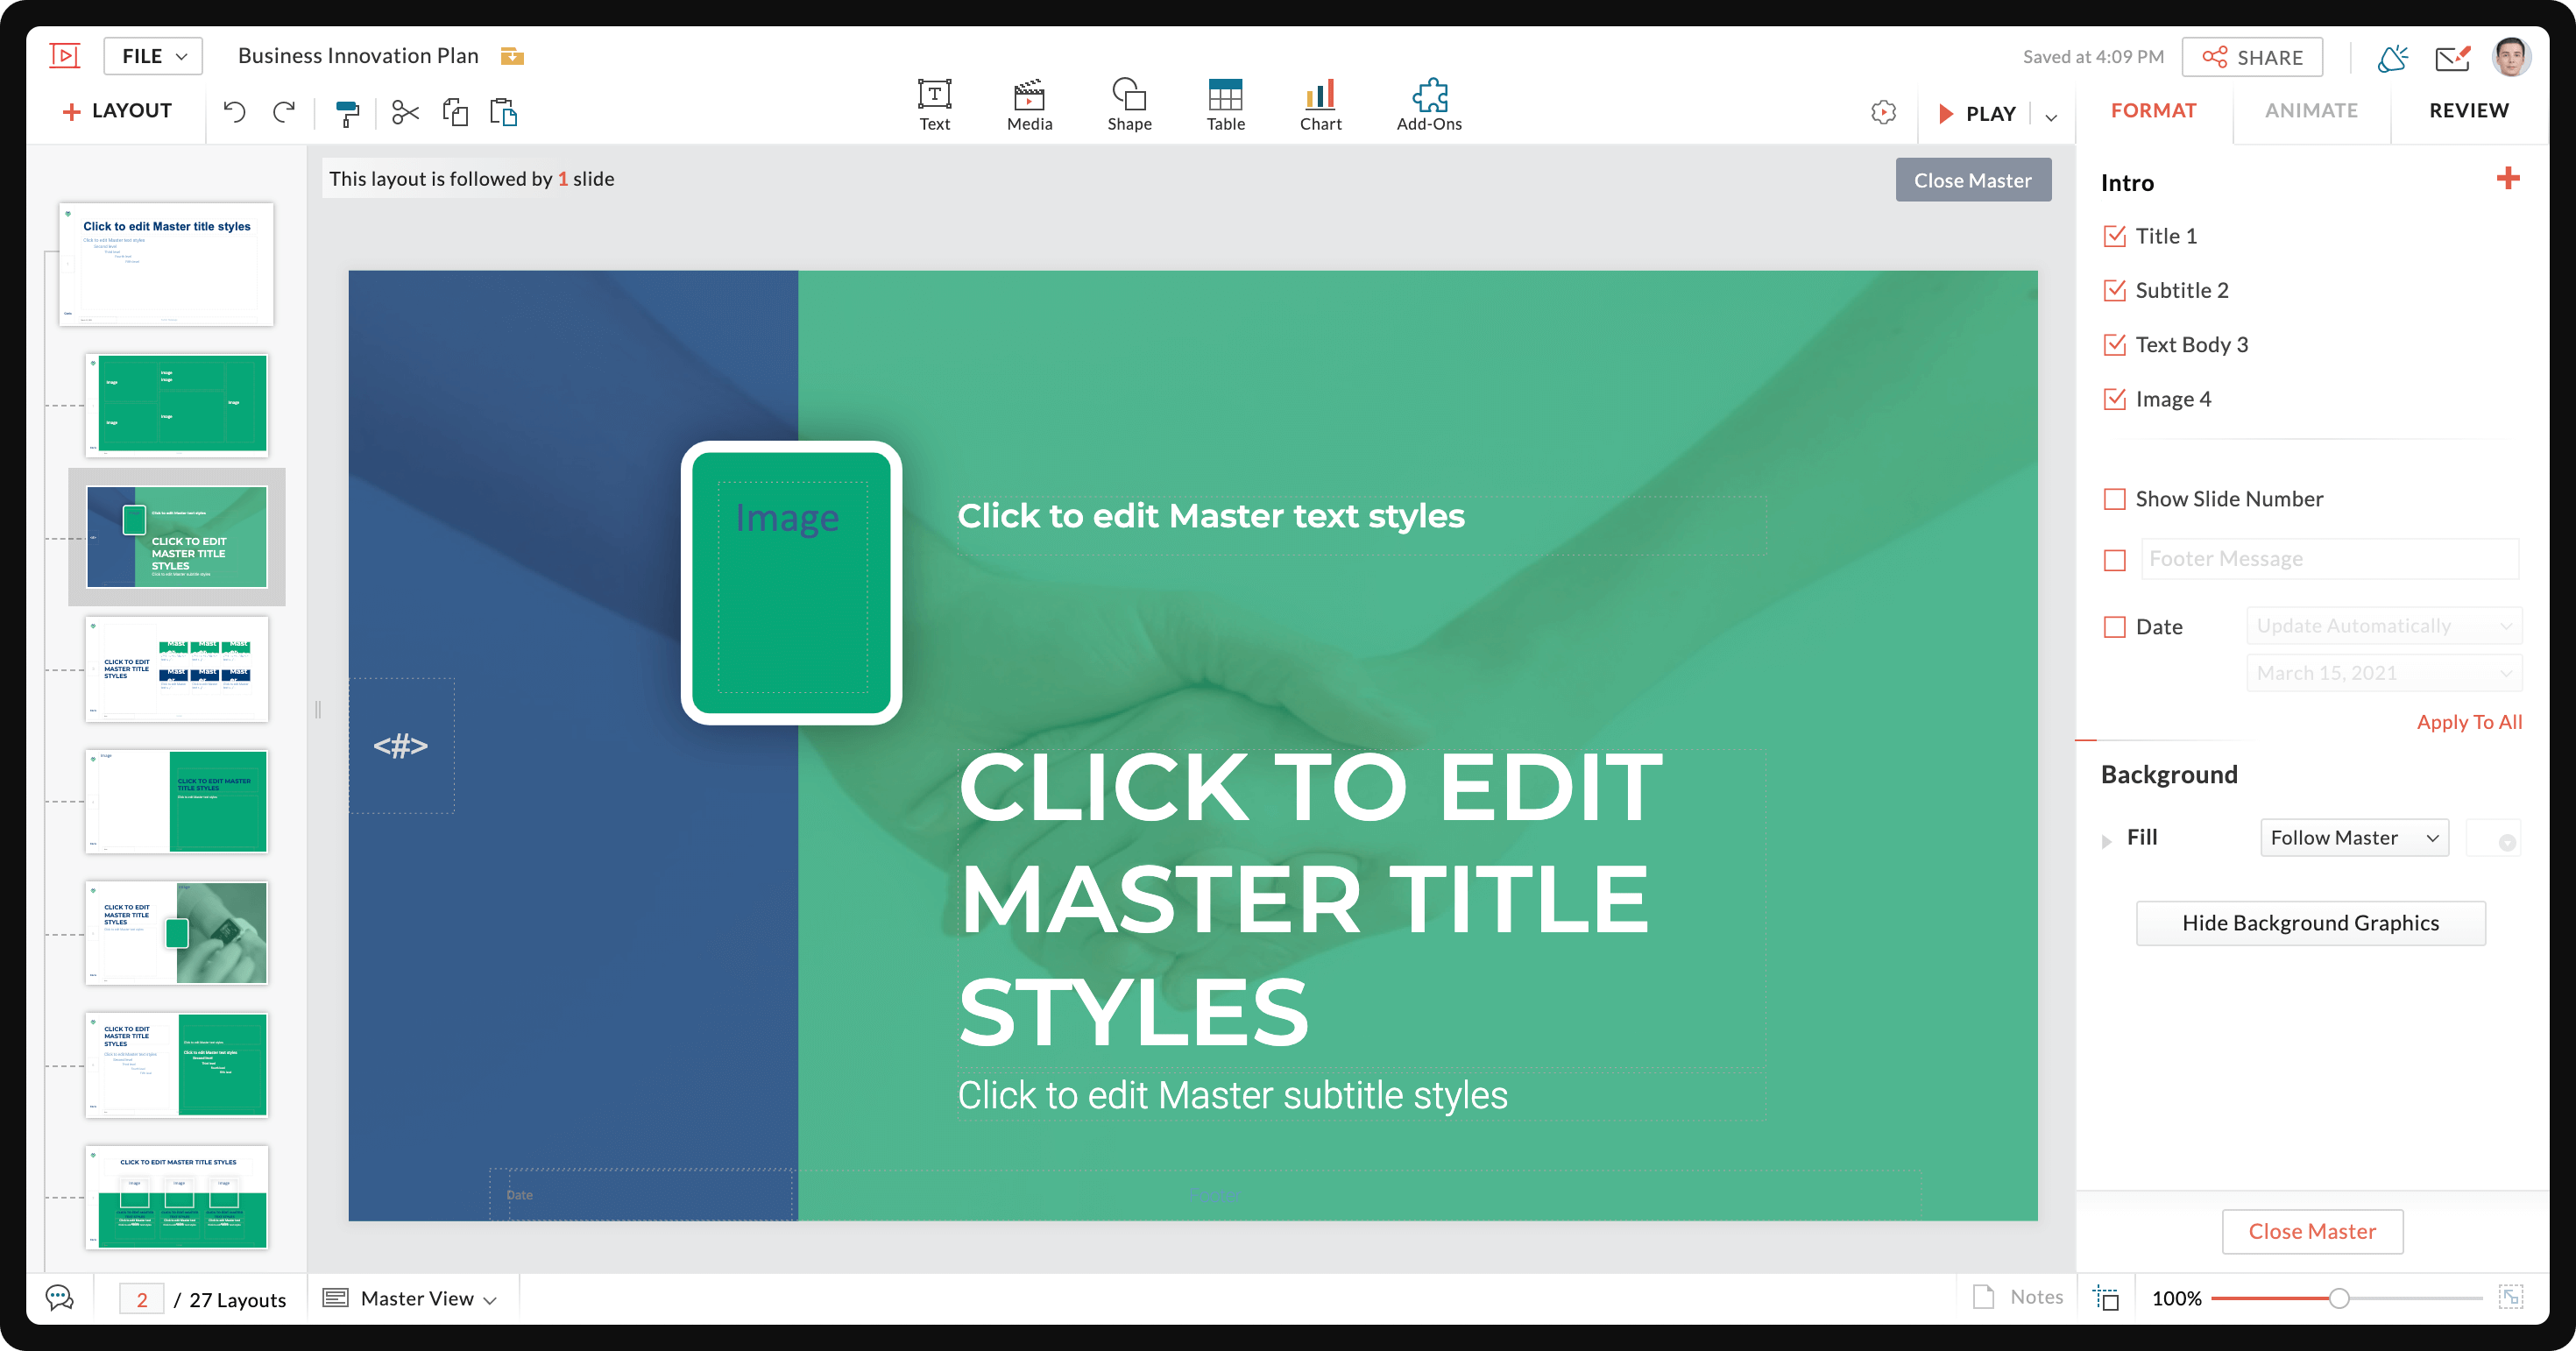 Add a placeholder in the Master View 